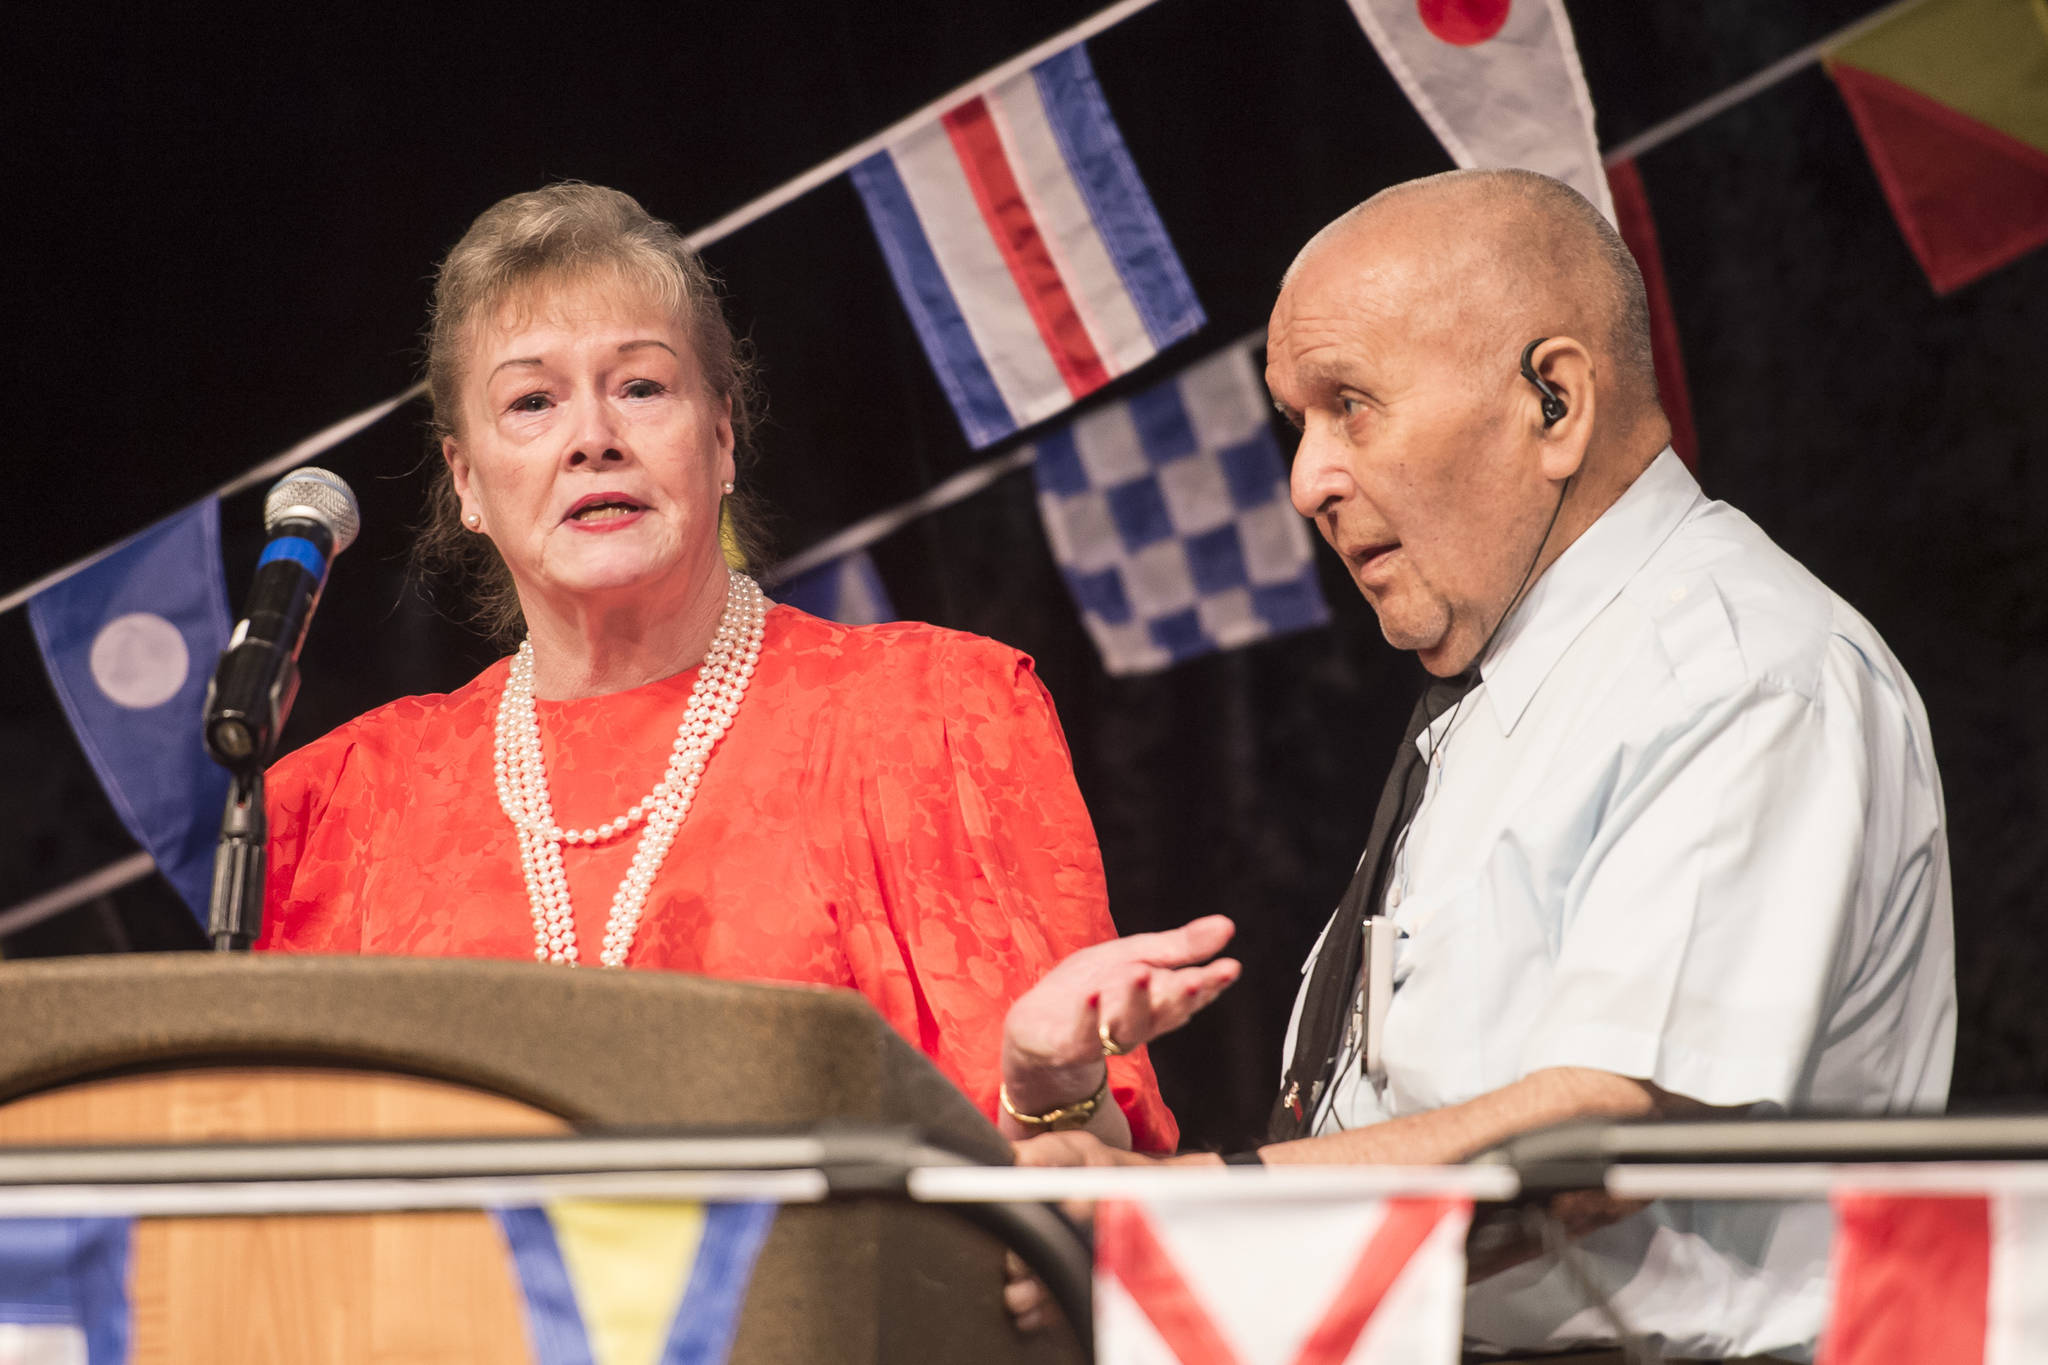 Jean and Steve Sztuk speak after being given the 2018 Chamber of Commerce Lifetime Achievement award during the Chamber’s annual dinner at Centennial Hall on Saturday, Oct. 13, 2018. (Michael Penn | Juneau Empire)